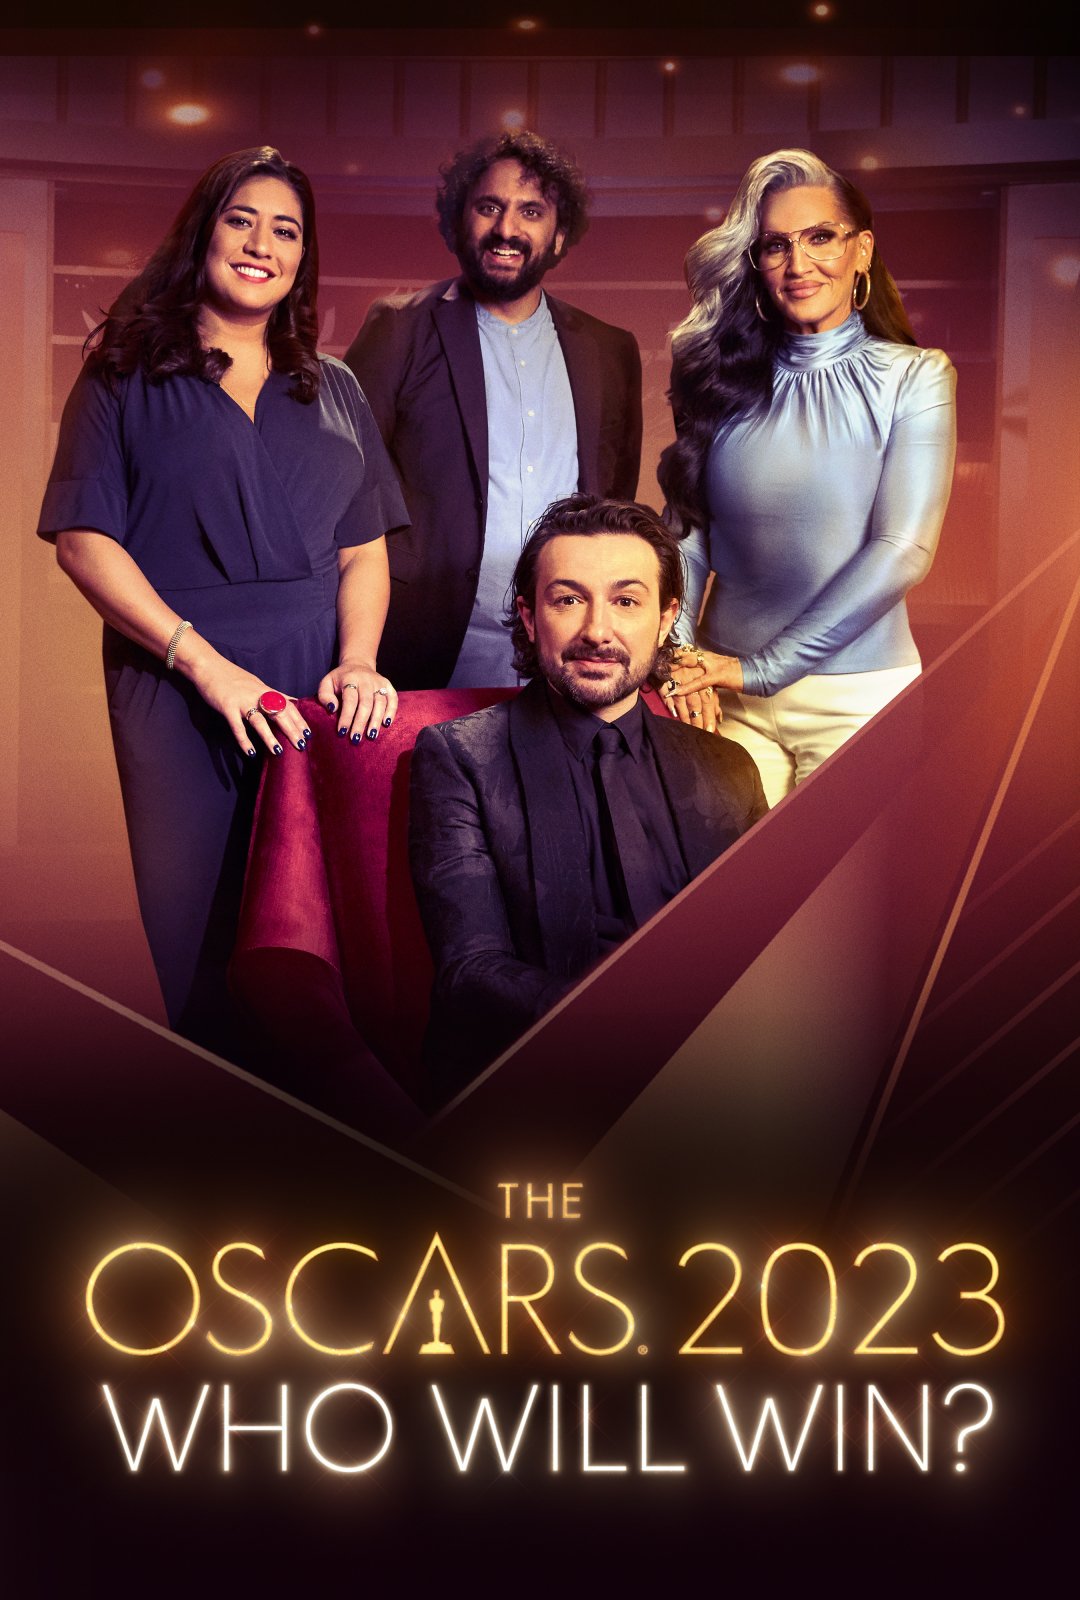 The Oscars 2023: Who Will Win?